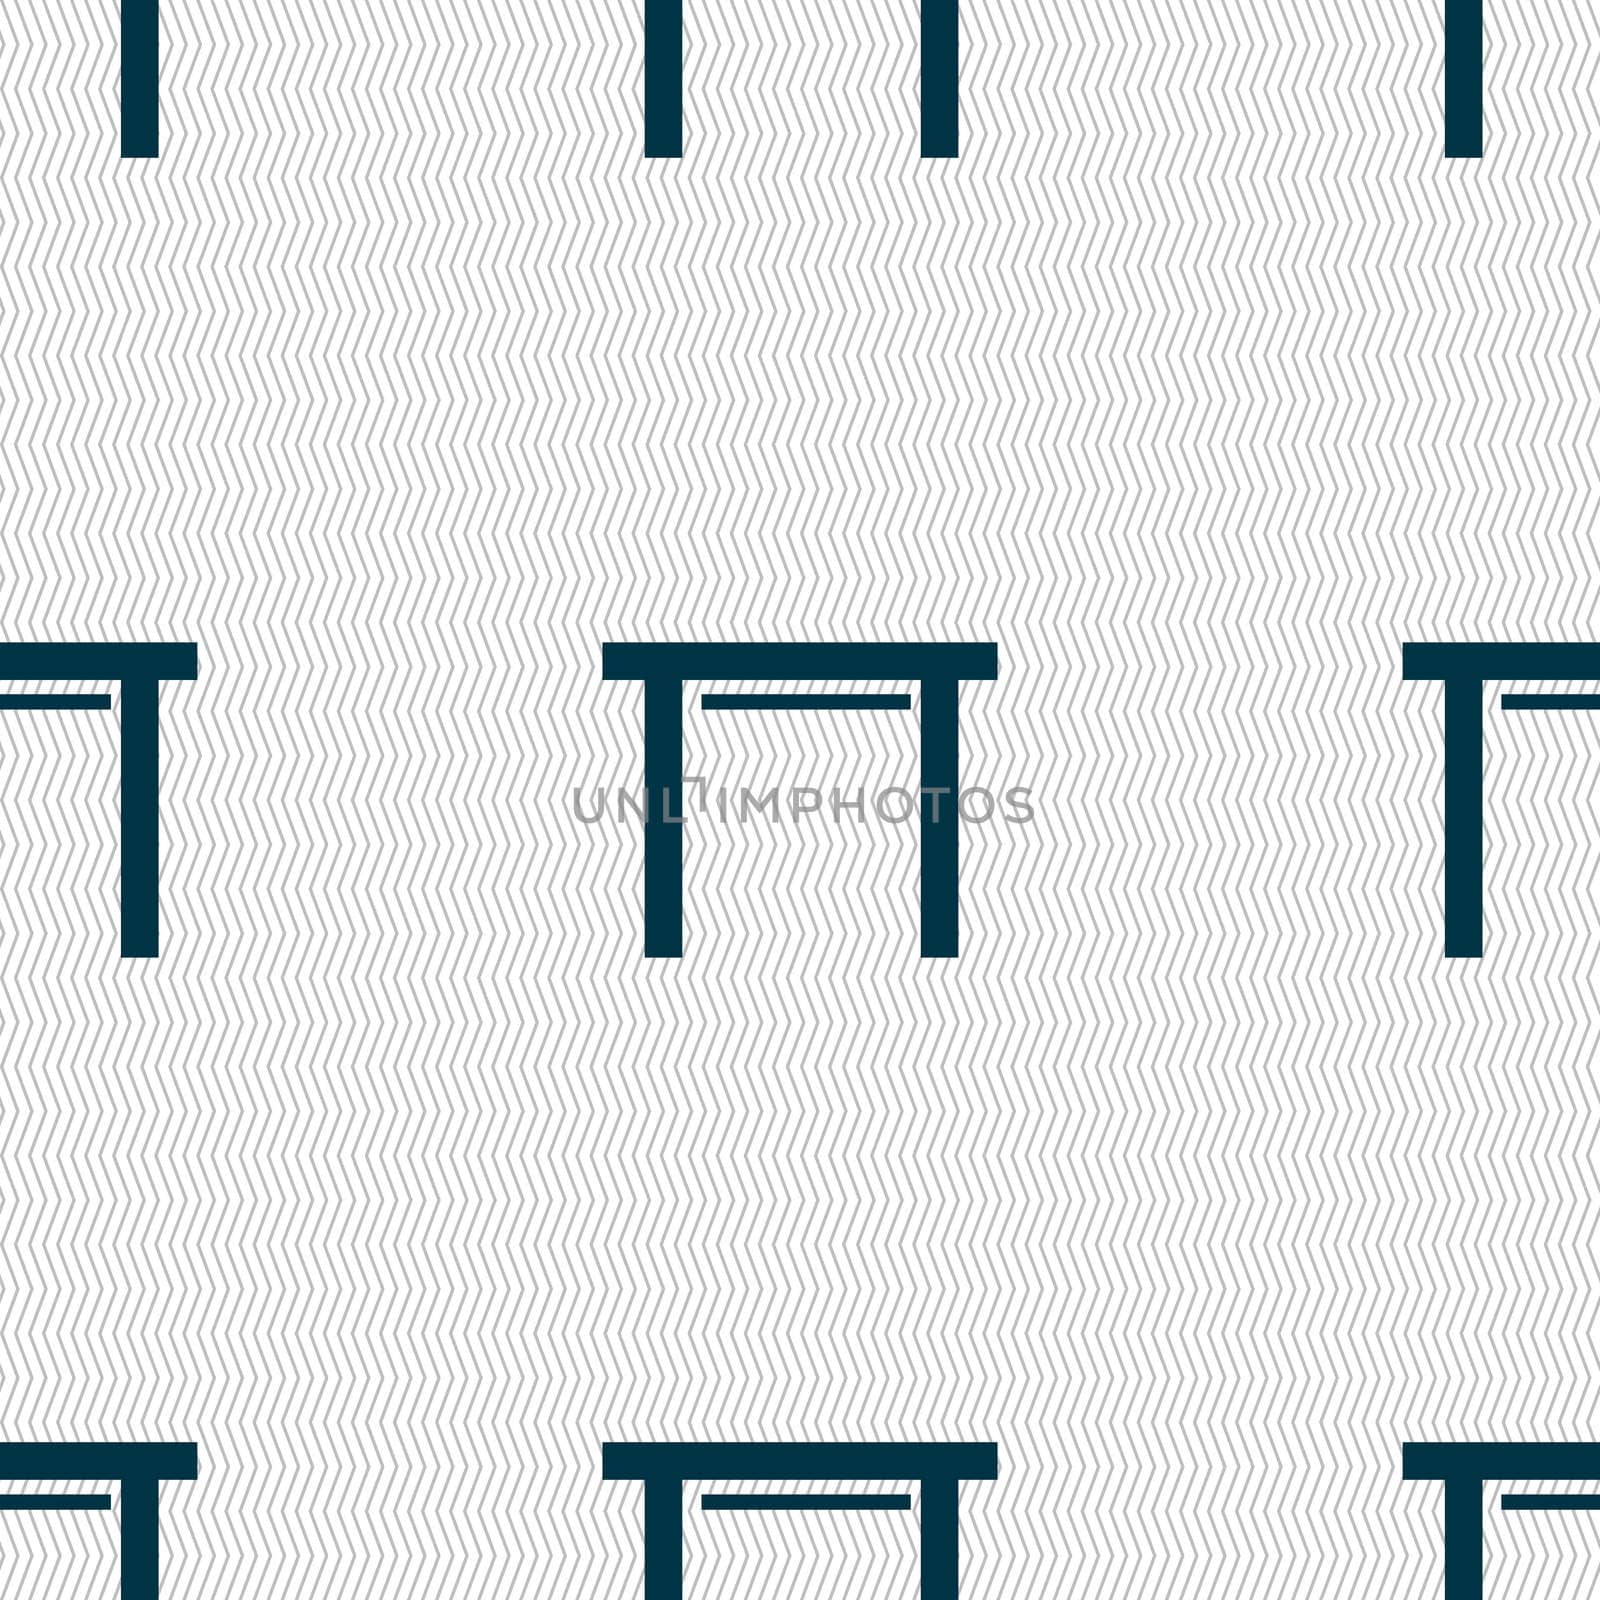 stool seat icon sign. Seamless abstract background with geometric shapes. illustration